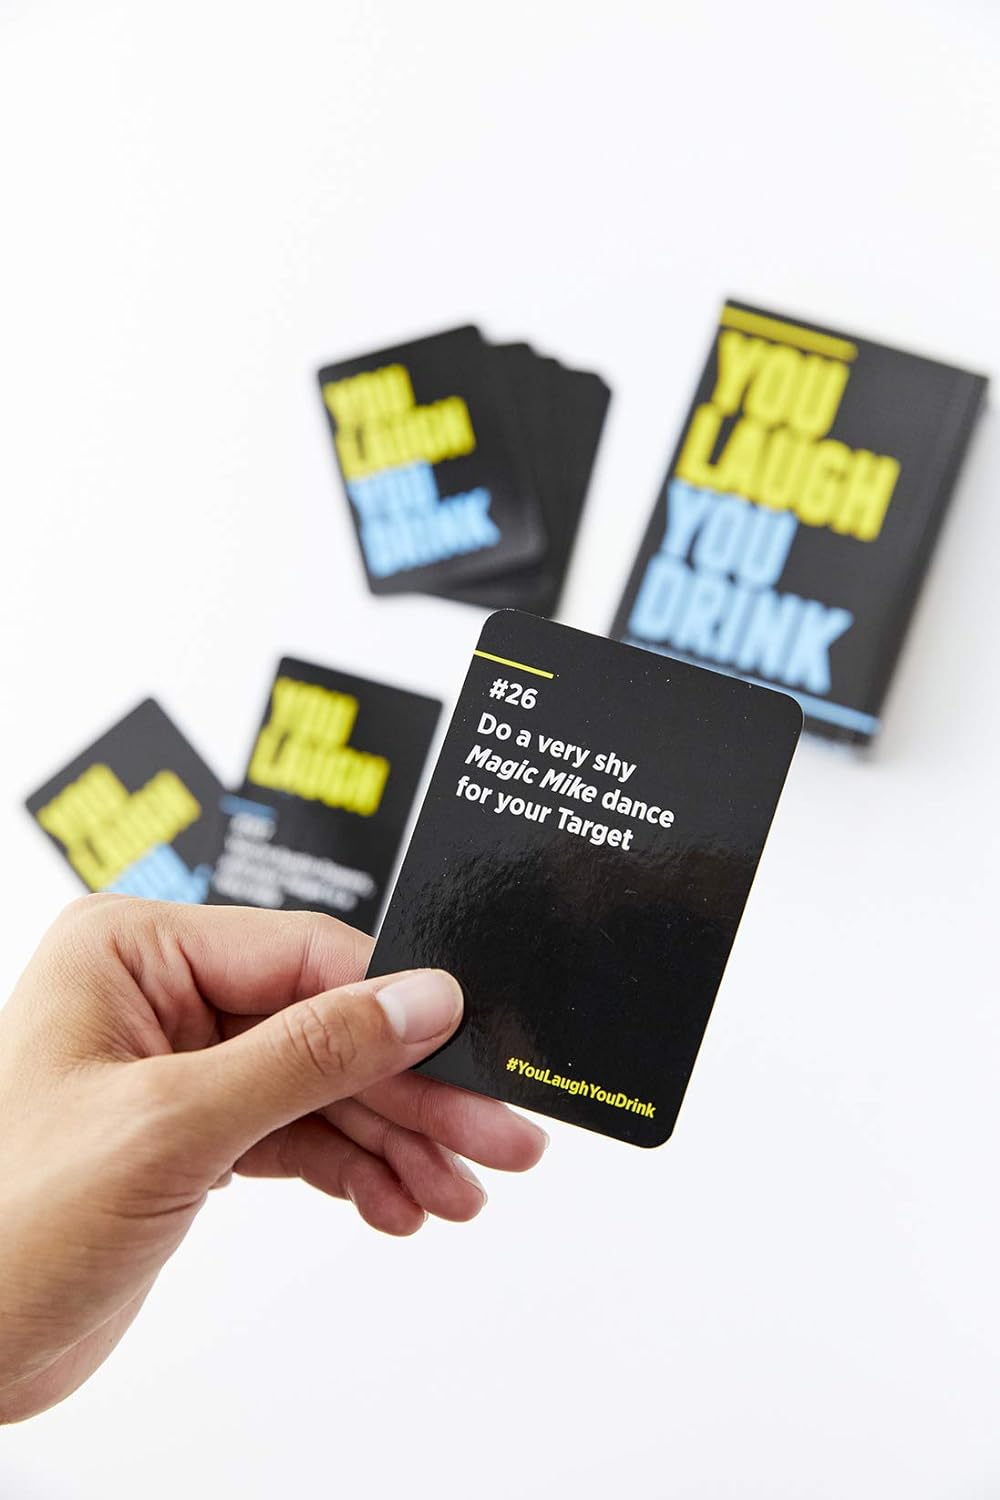 You Laugh You Drink - A Party Game